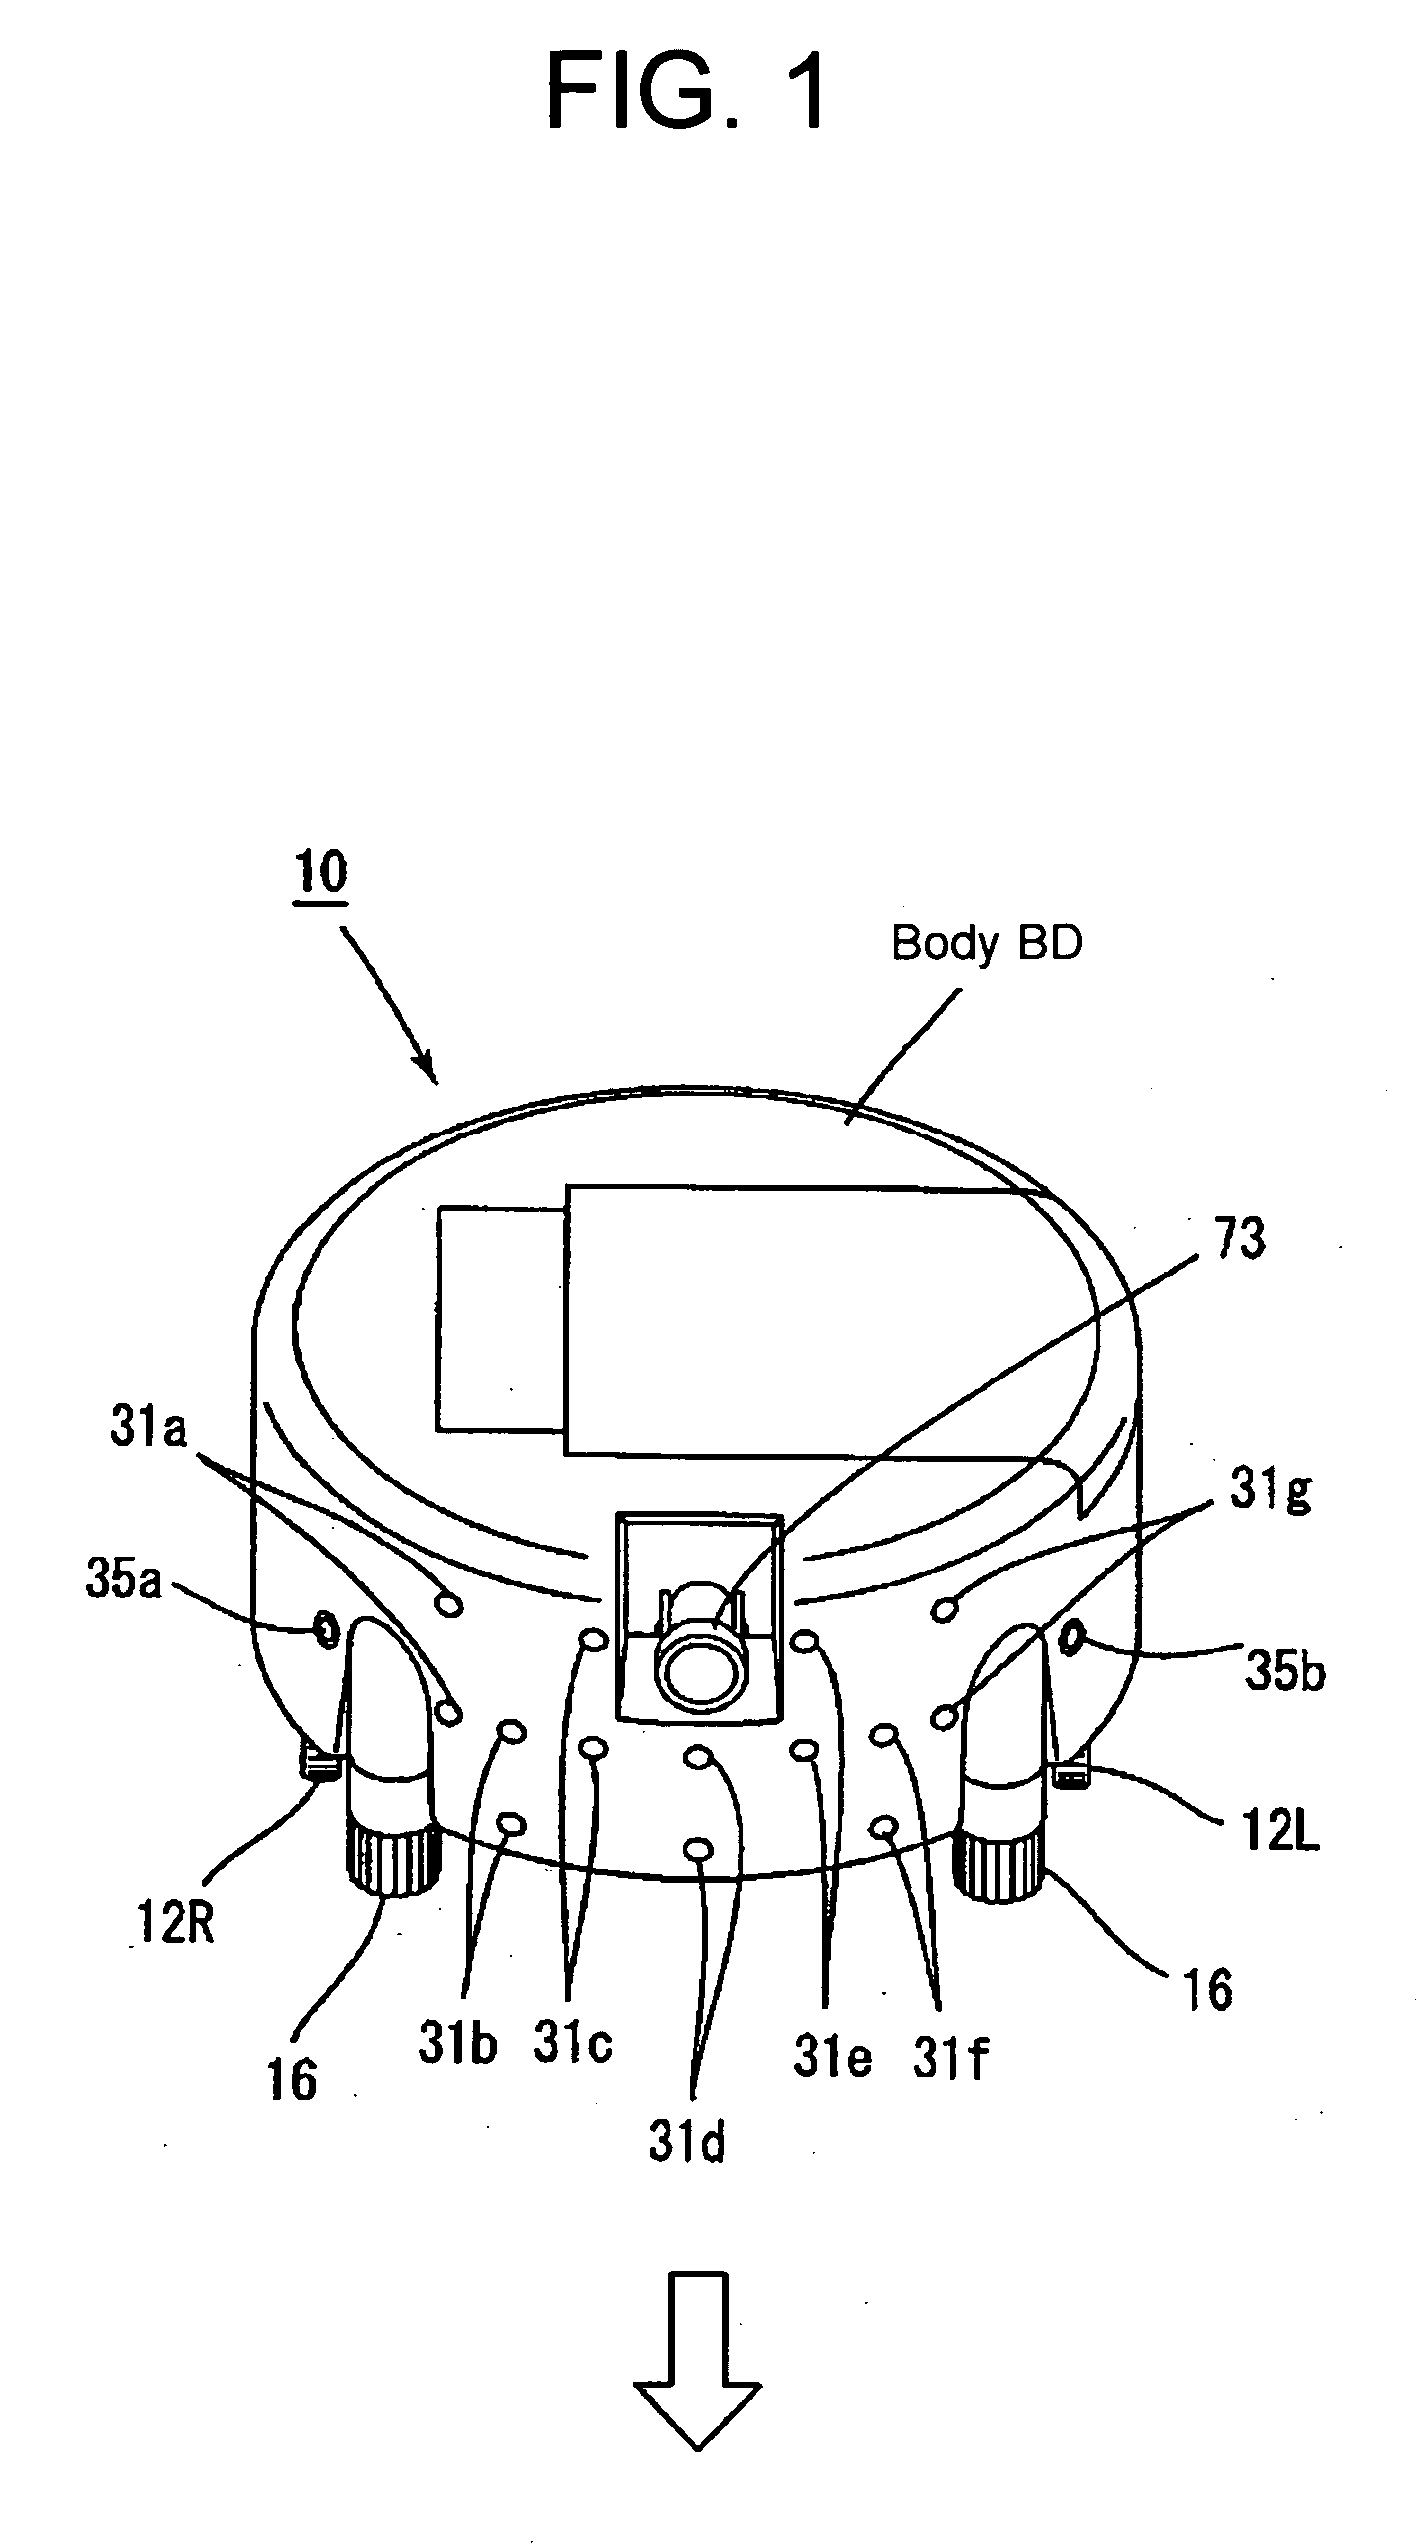 Self-propelled cleaner and self-propelled traveling apparatus